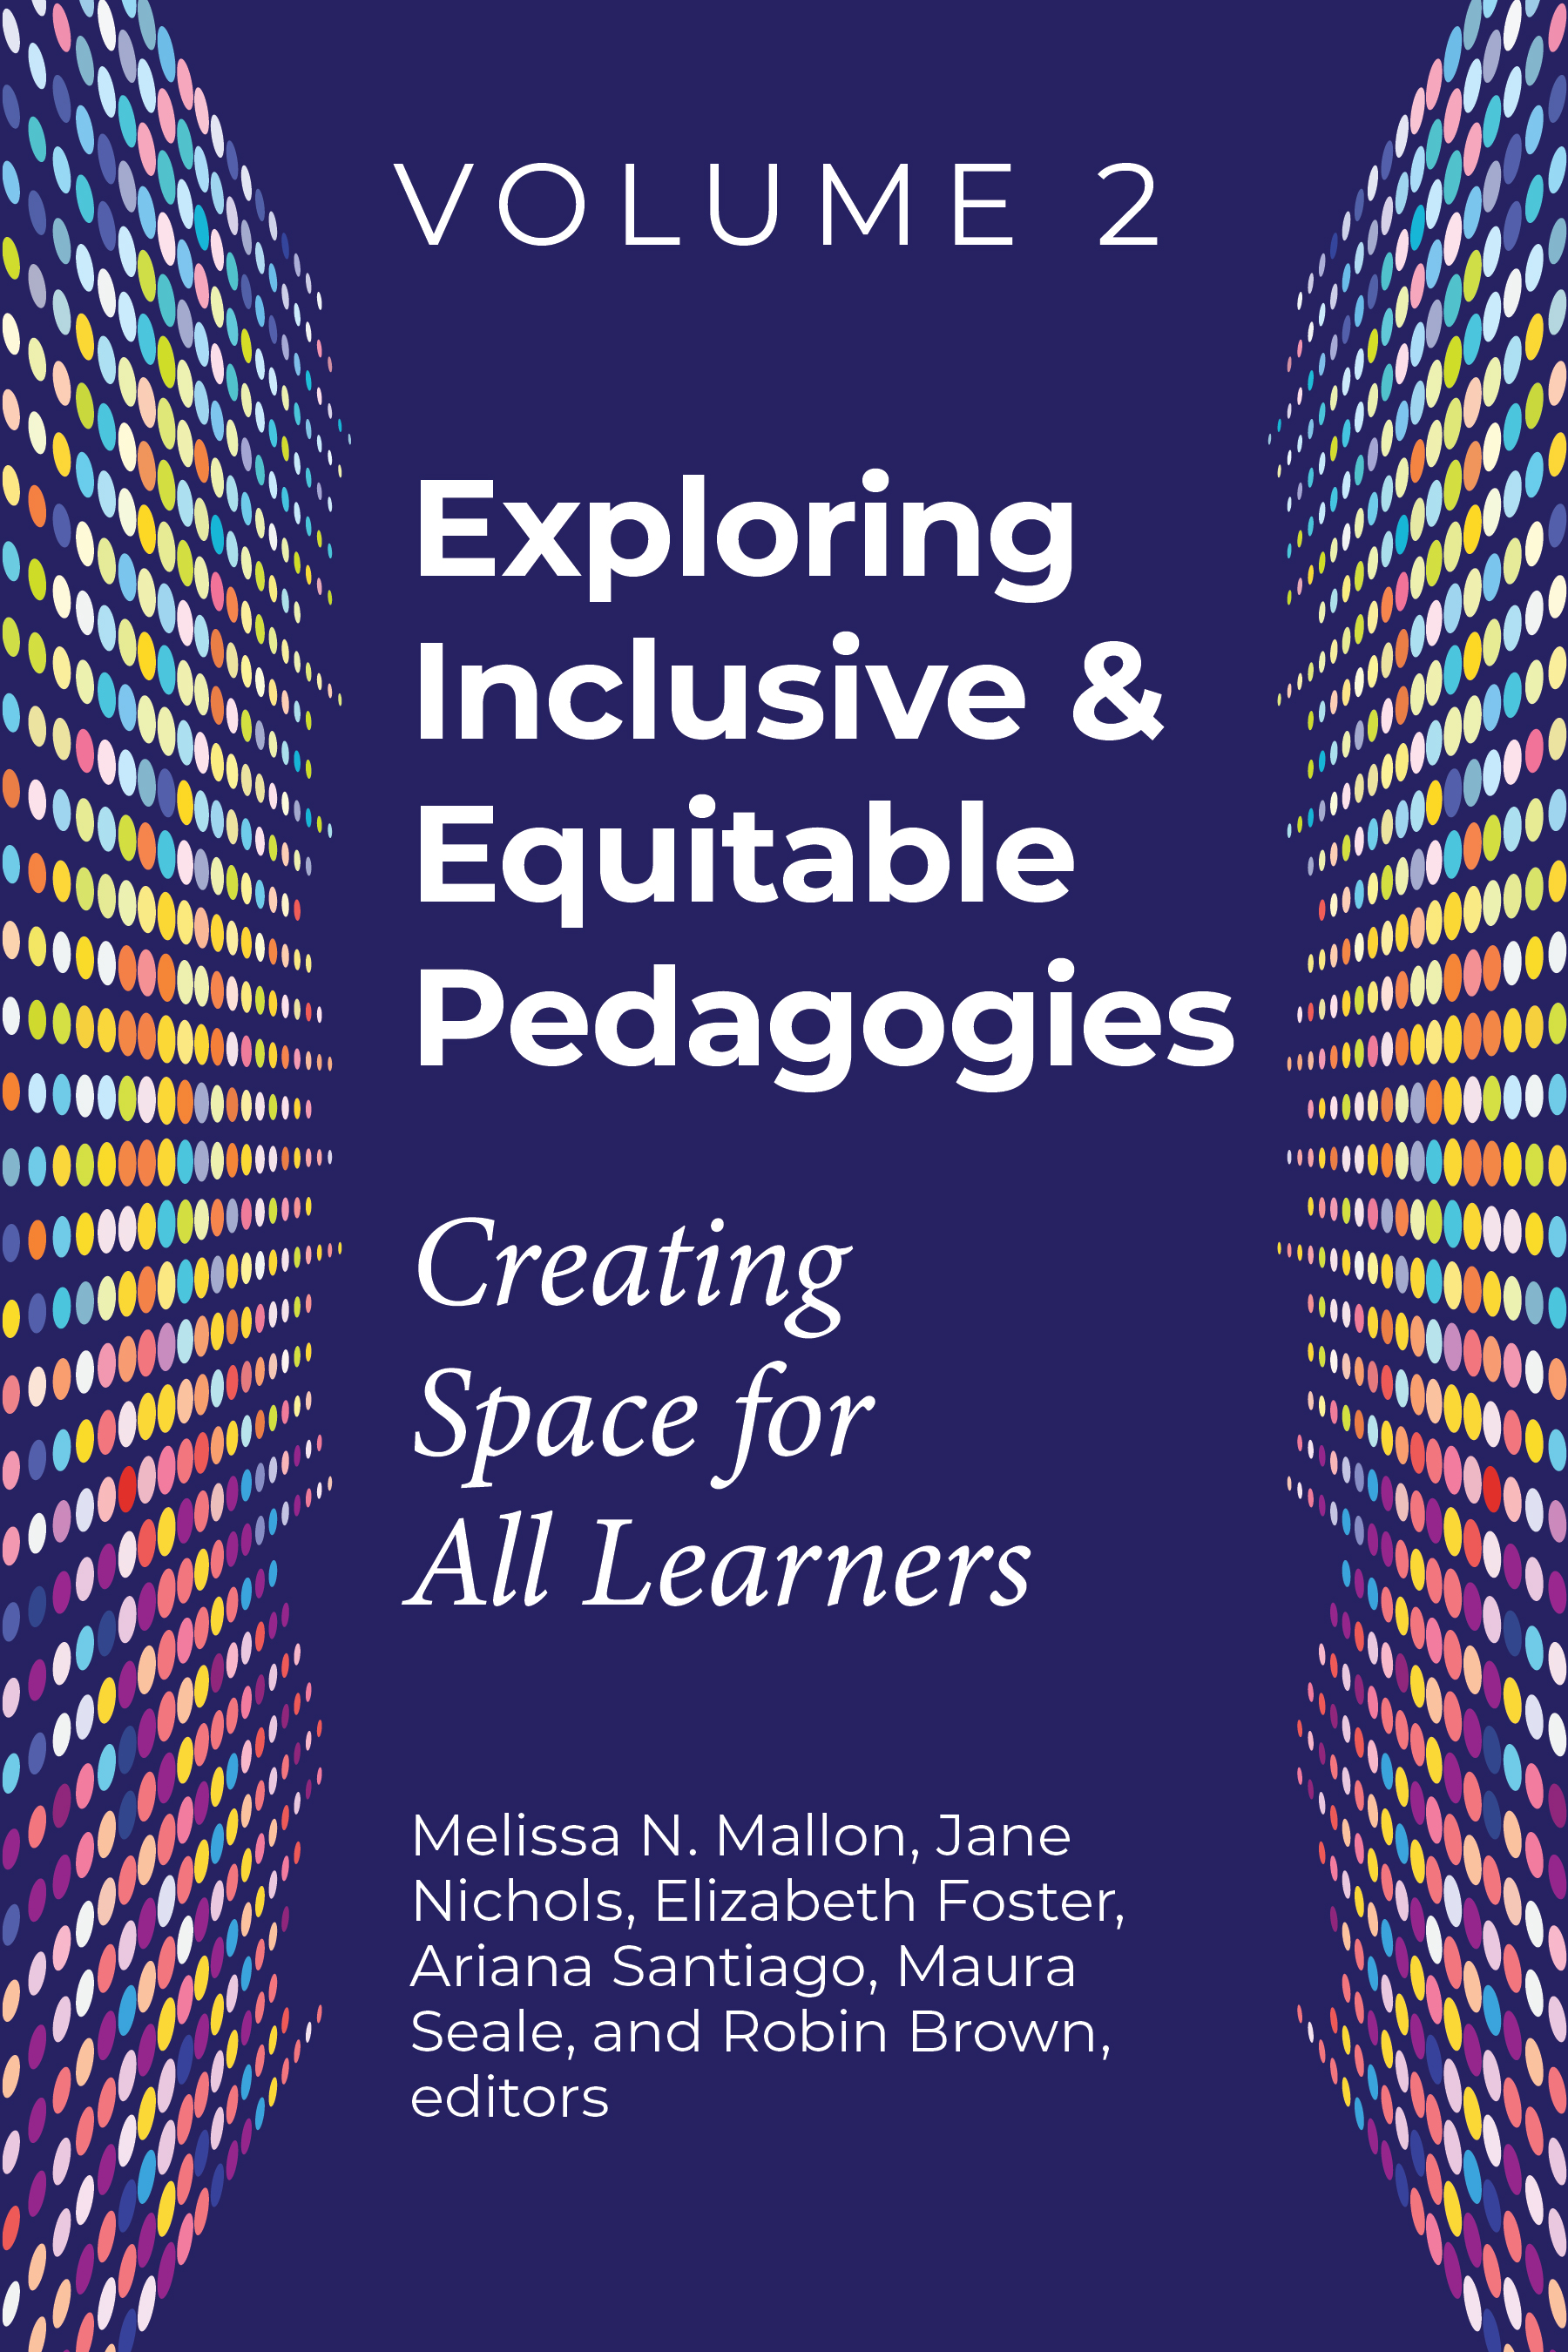 book cover for Exploring Inclusive & Equitable Pedagogies: Creating Space for All Learners, Volume 2